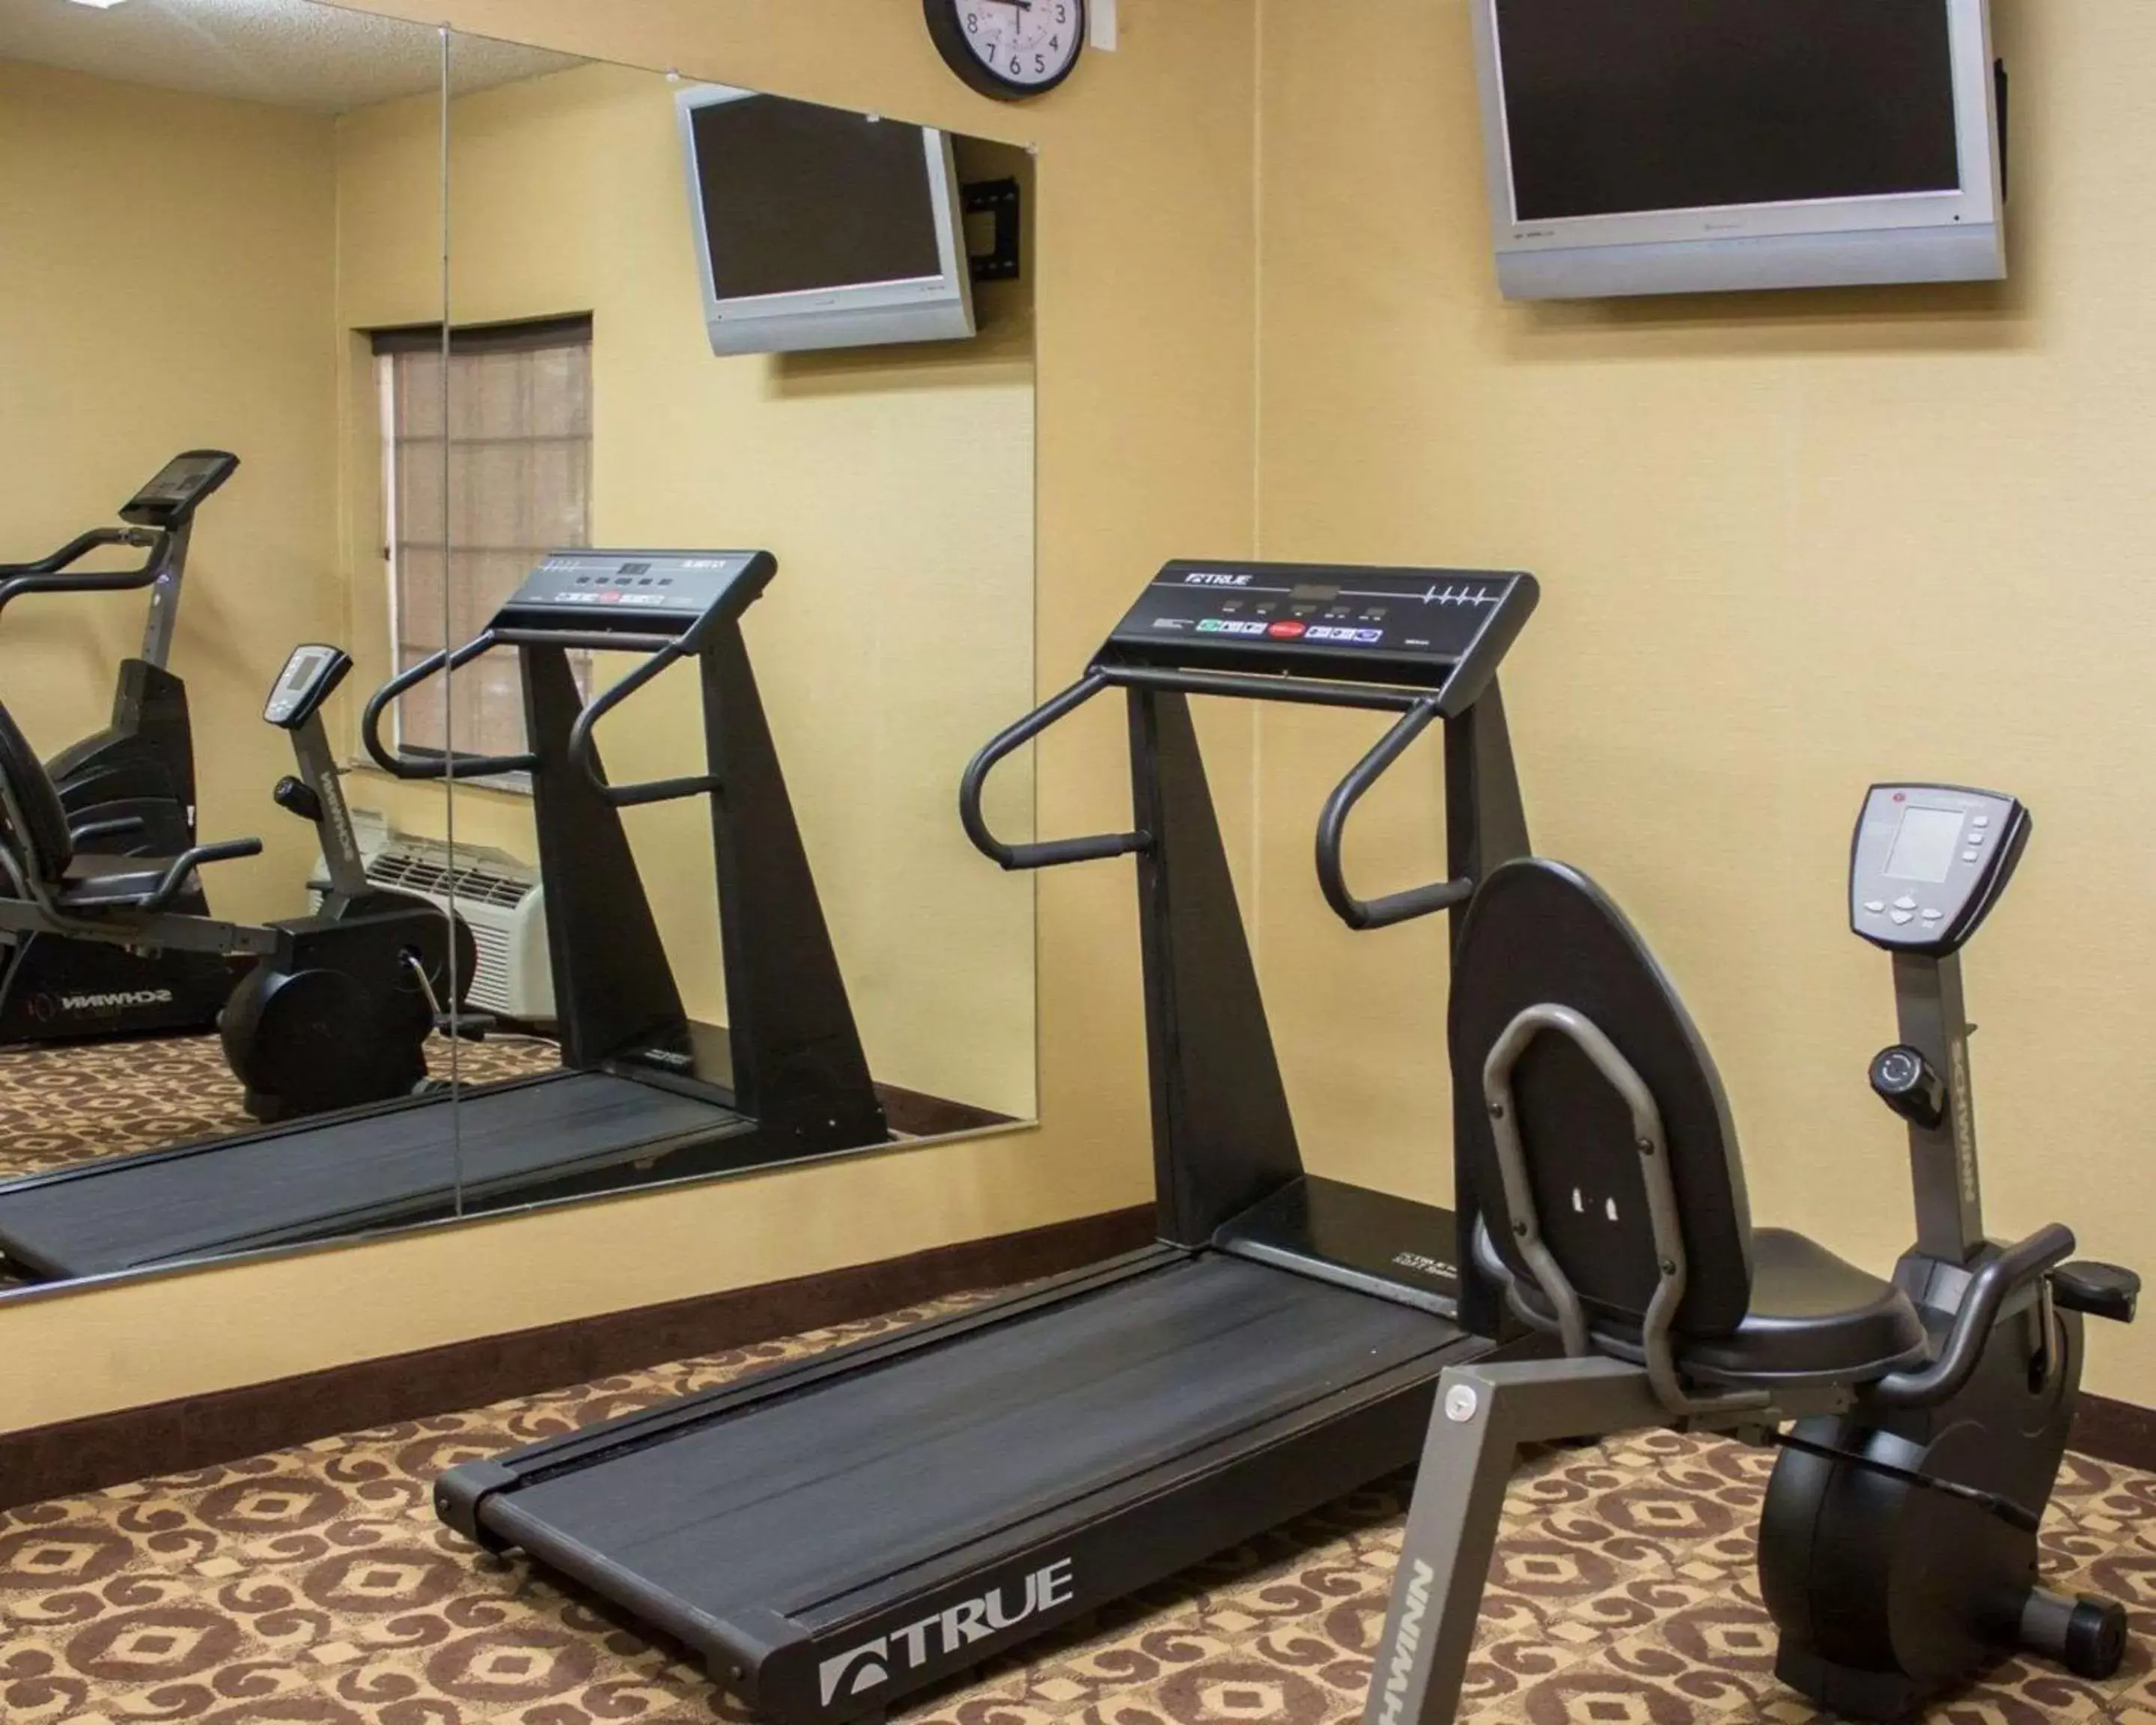 Fitness centre/facilities, Fitness Center/Facilities in Comfort Inn & Suites Trussville I-59 exit 141